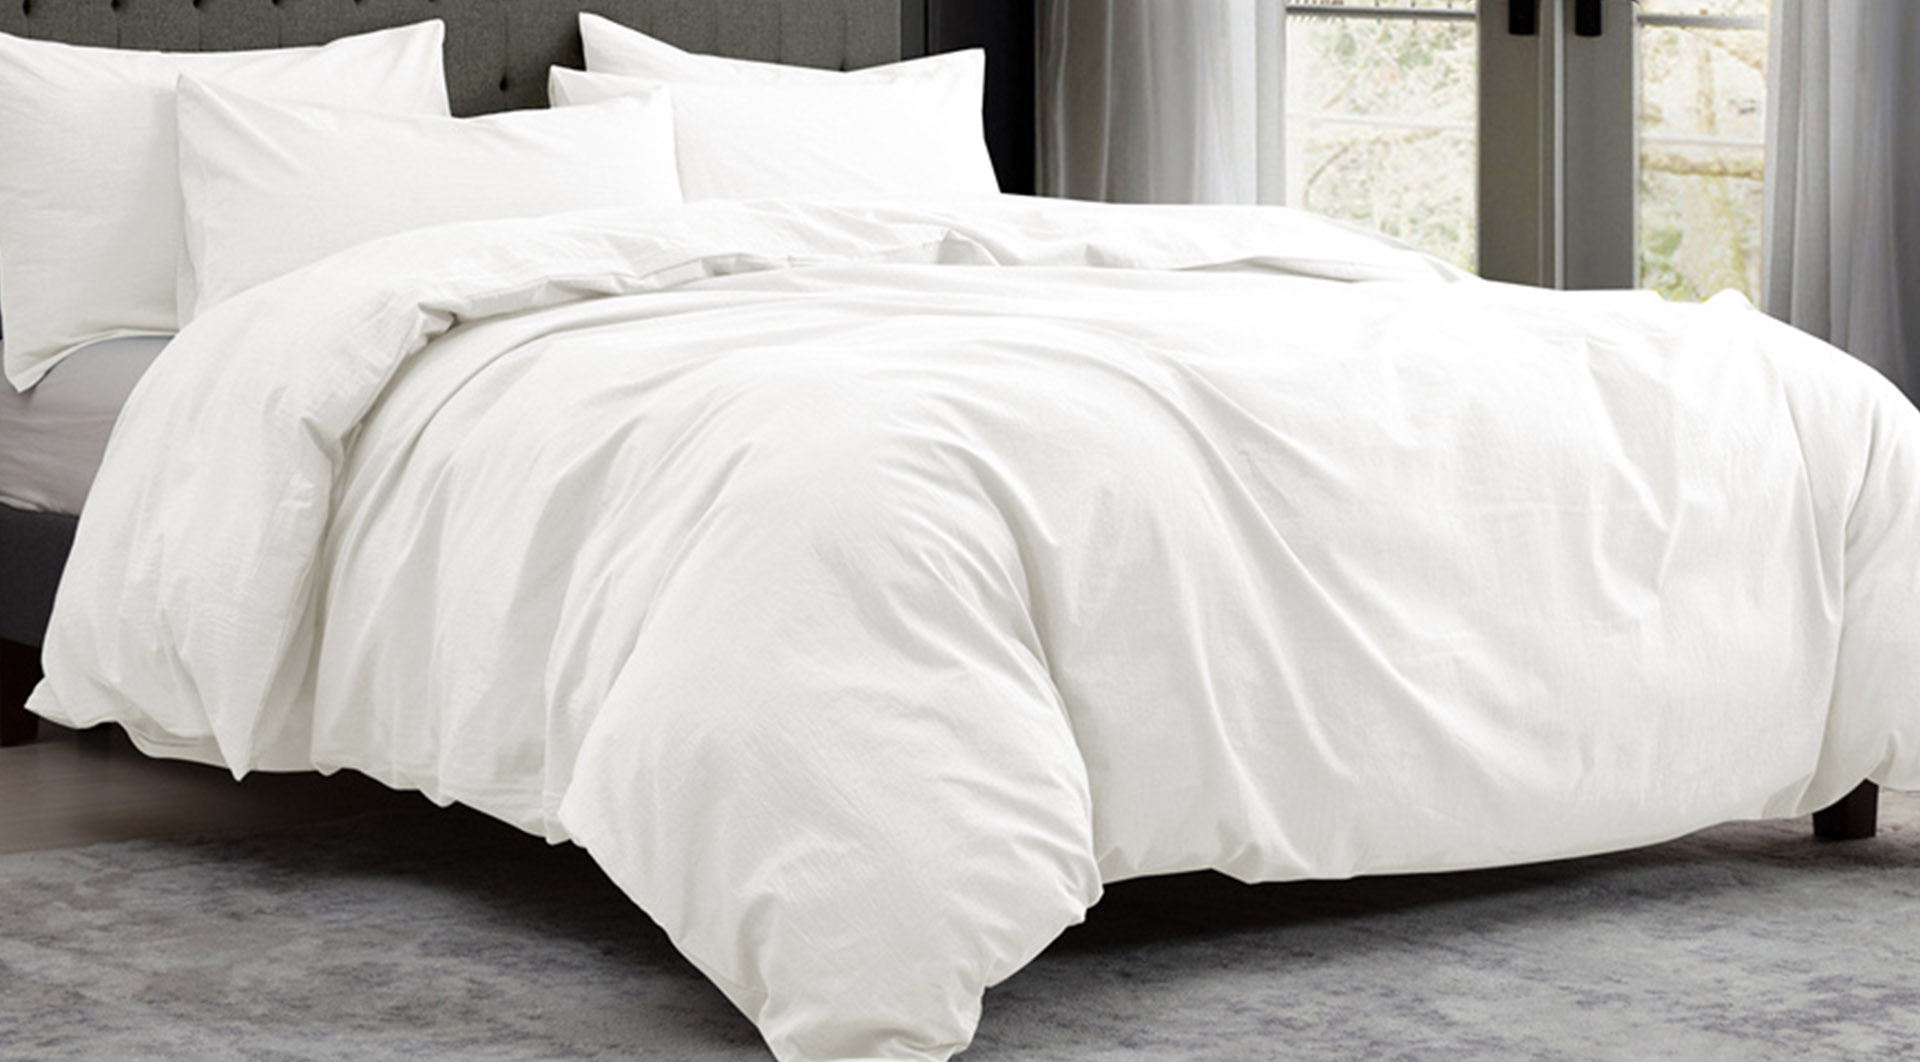 How to choose a washed microfiber fabric four-piece set?